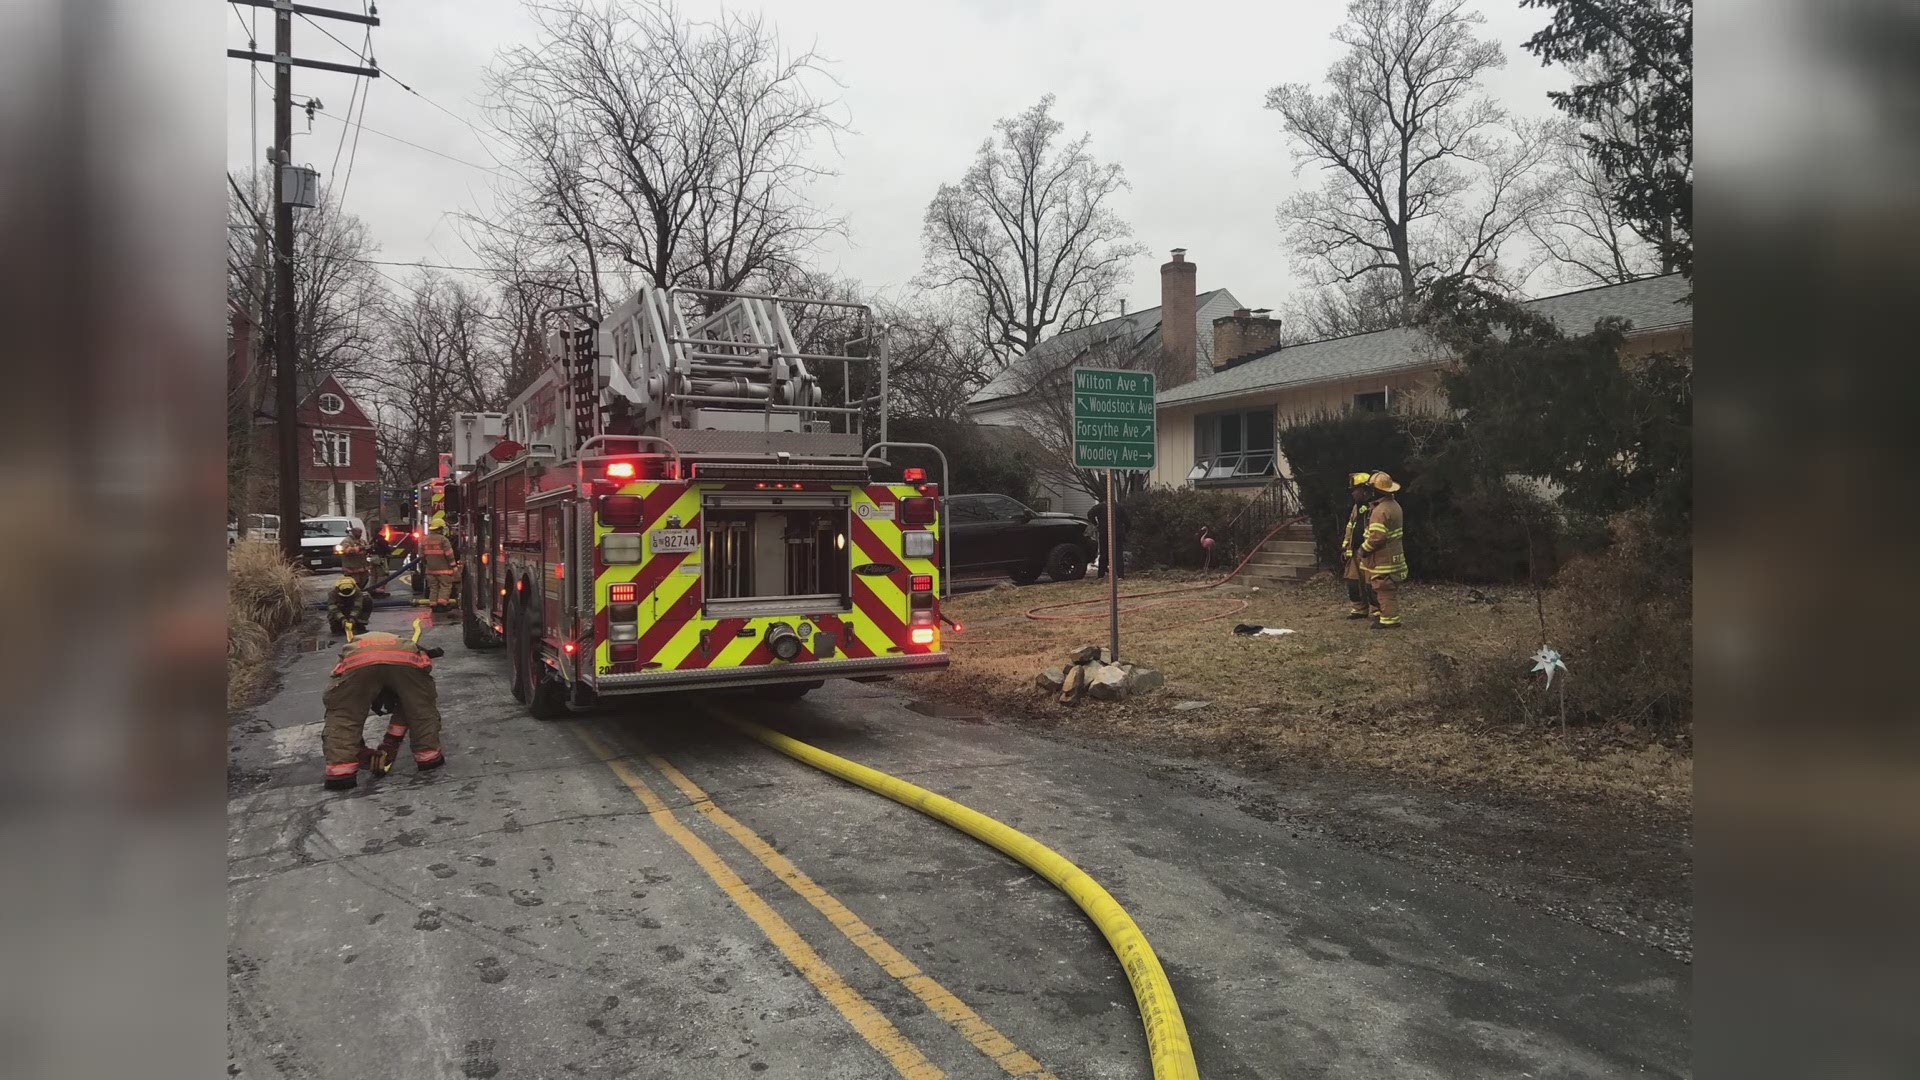 Crews are at the scene of a single house fire on the 2800 block of Woodstock Avenue in Forest Glen Park near Linden Lane.